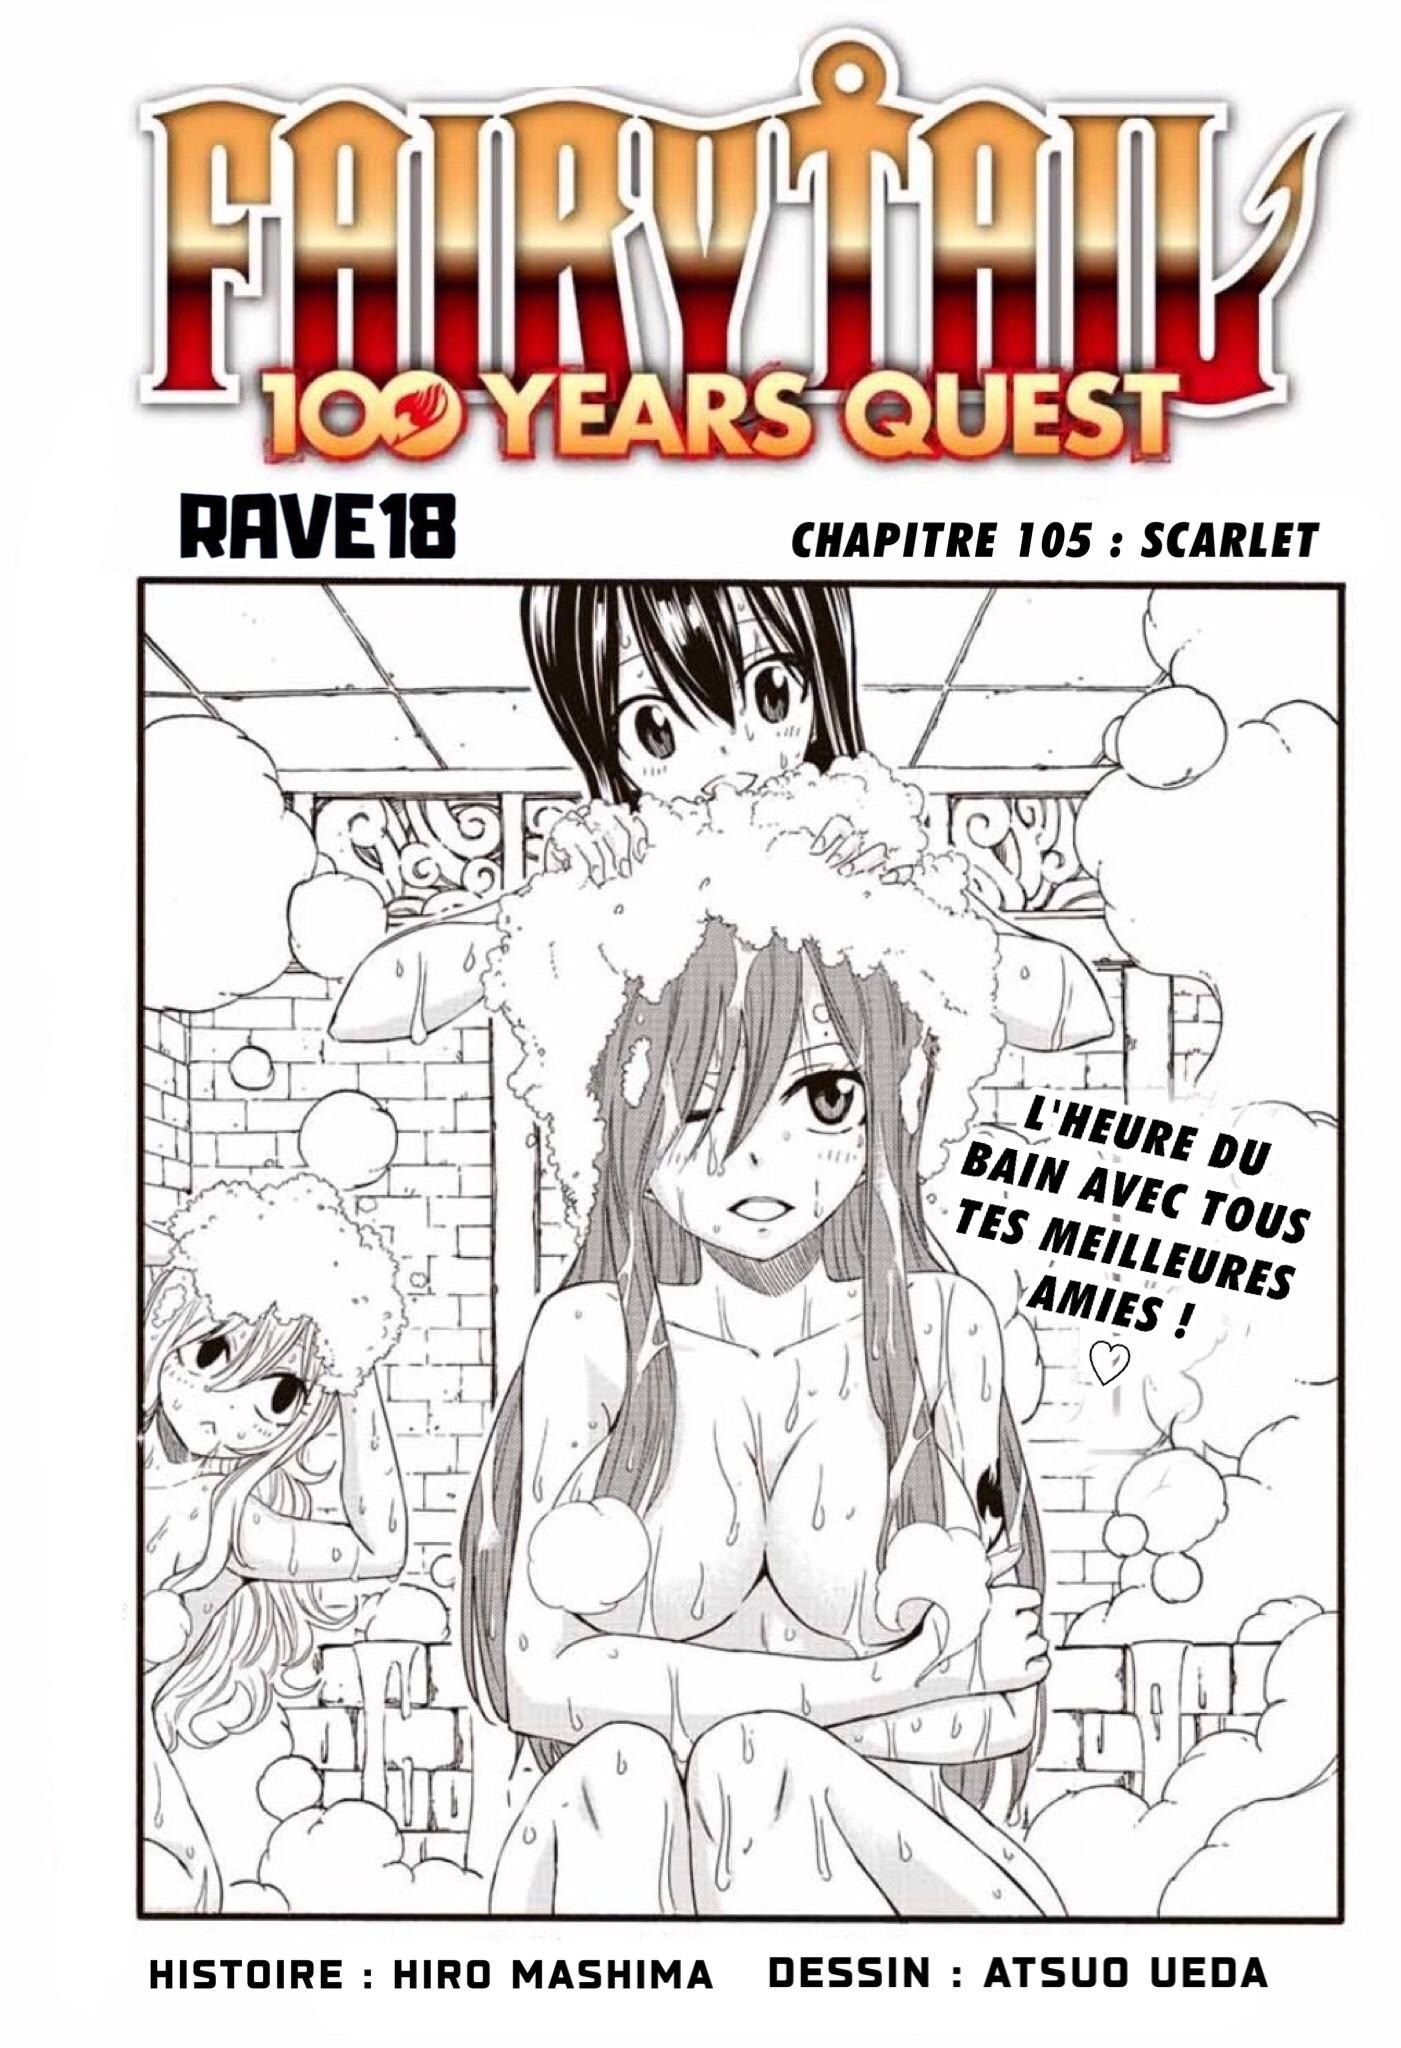 Fairy Tail 100 Years Quest: Chapter chapitre-105 - Page 1